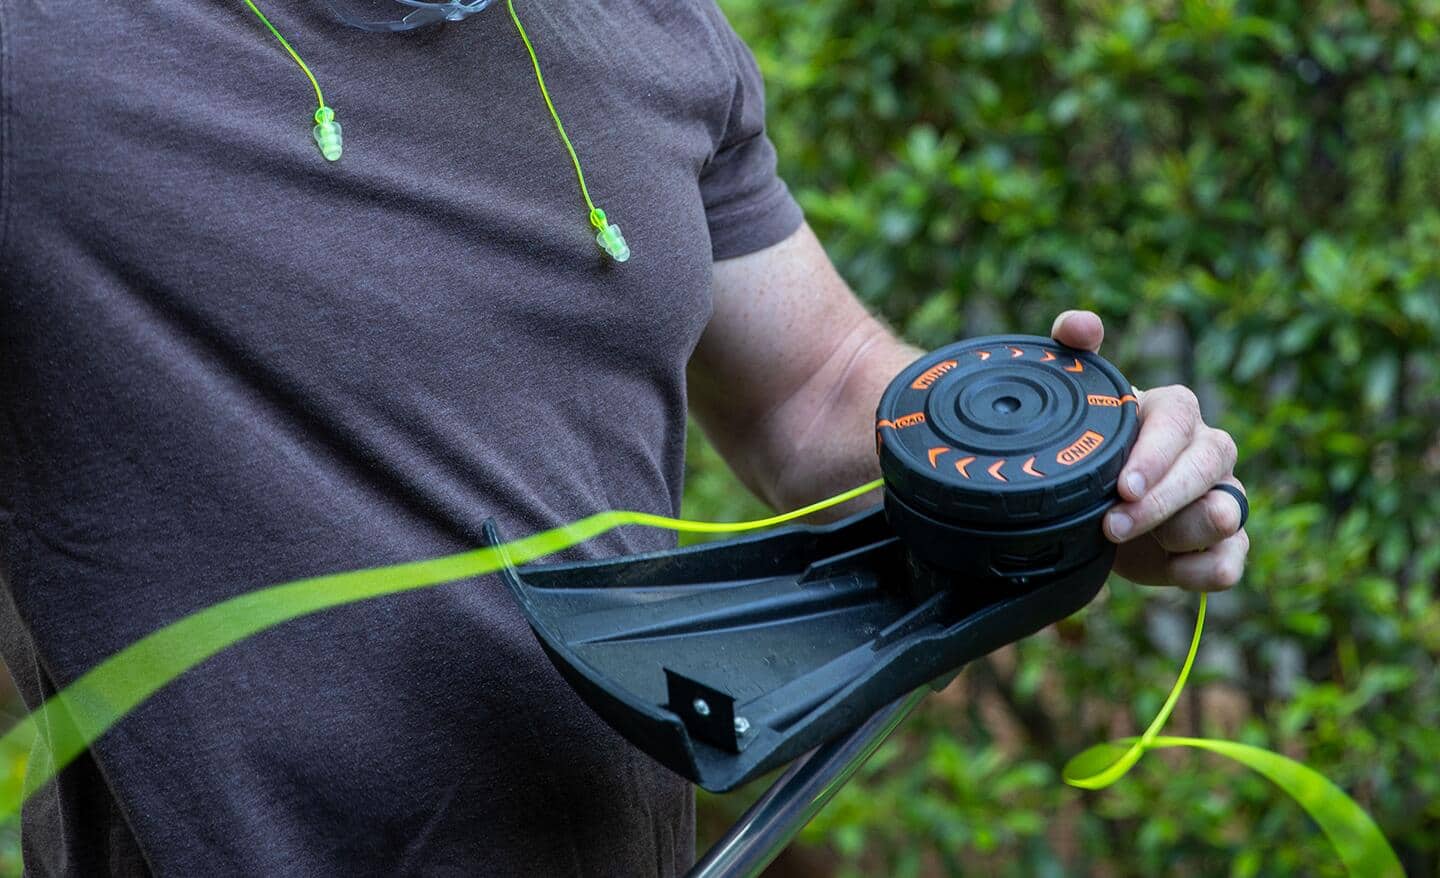 A person refills a string trimmer with fresh trimmer line.